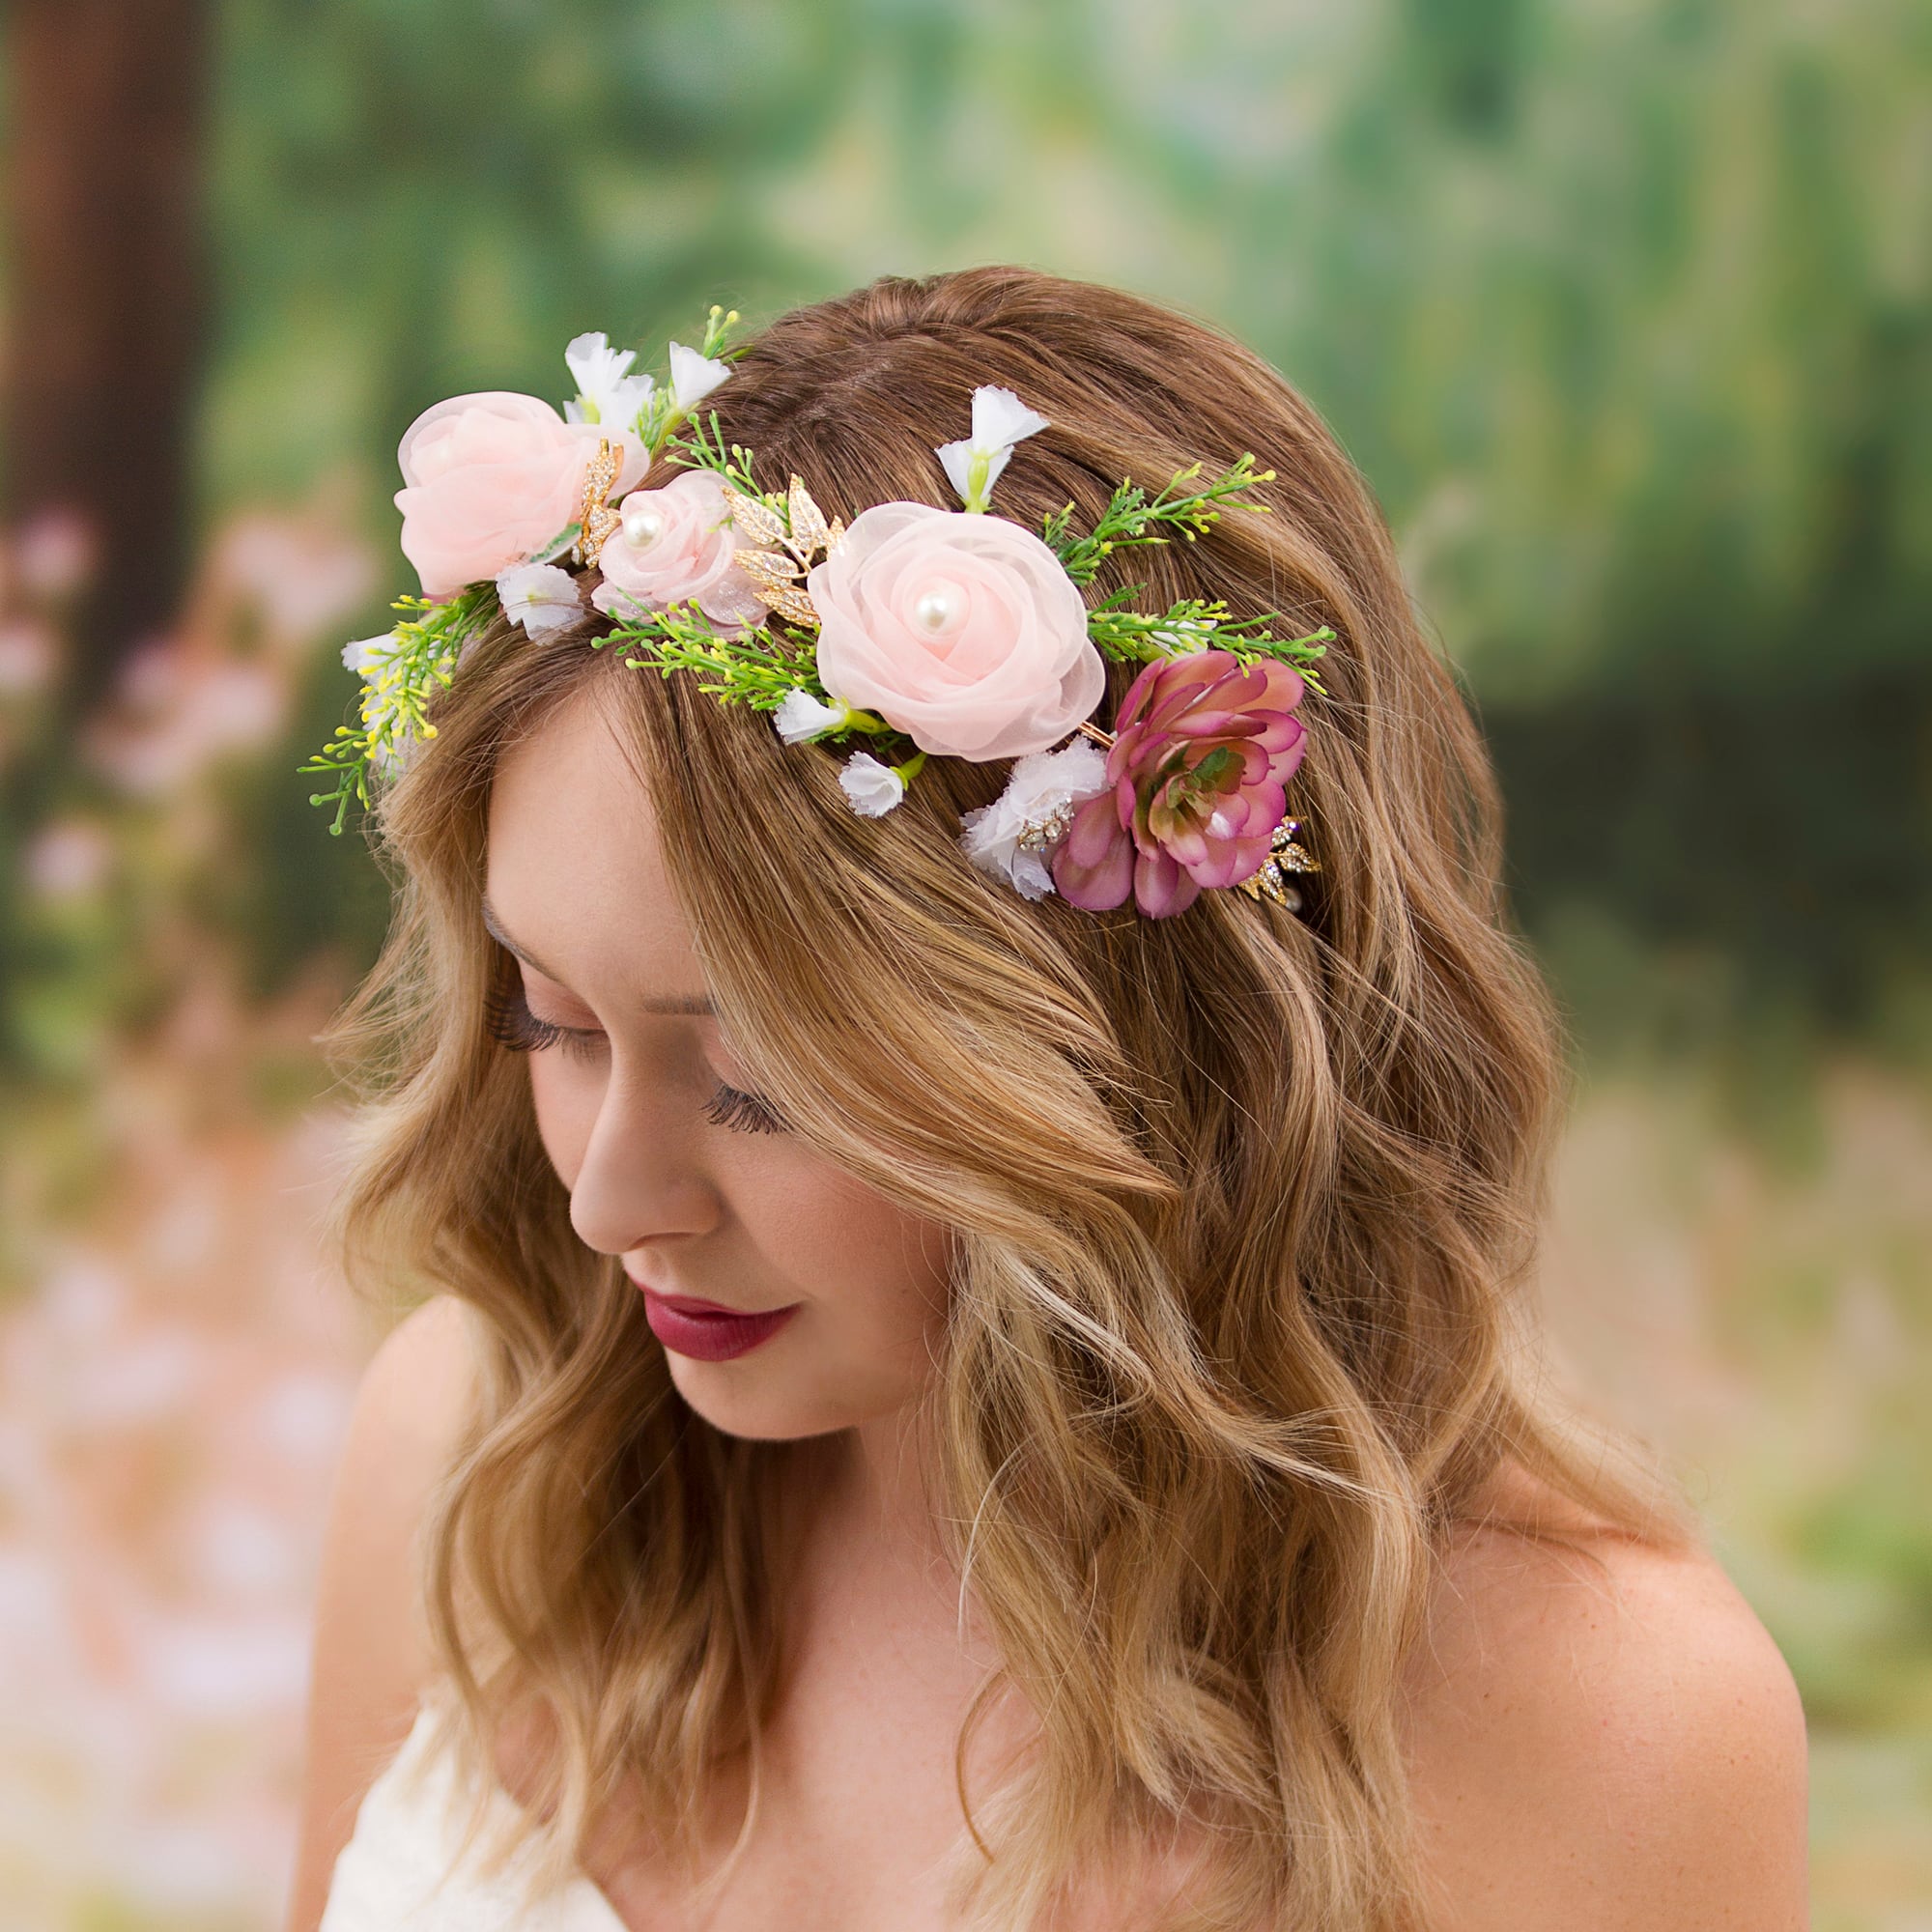 where to find flower crowns